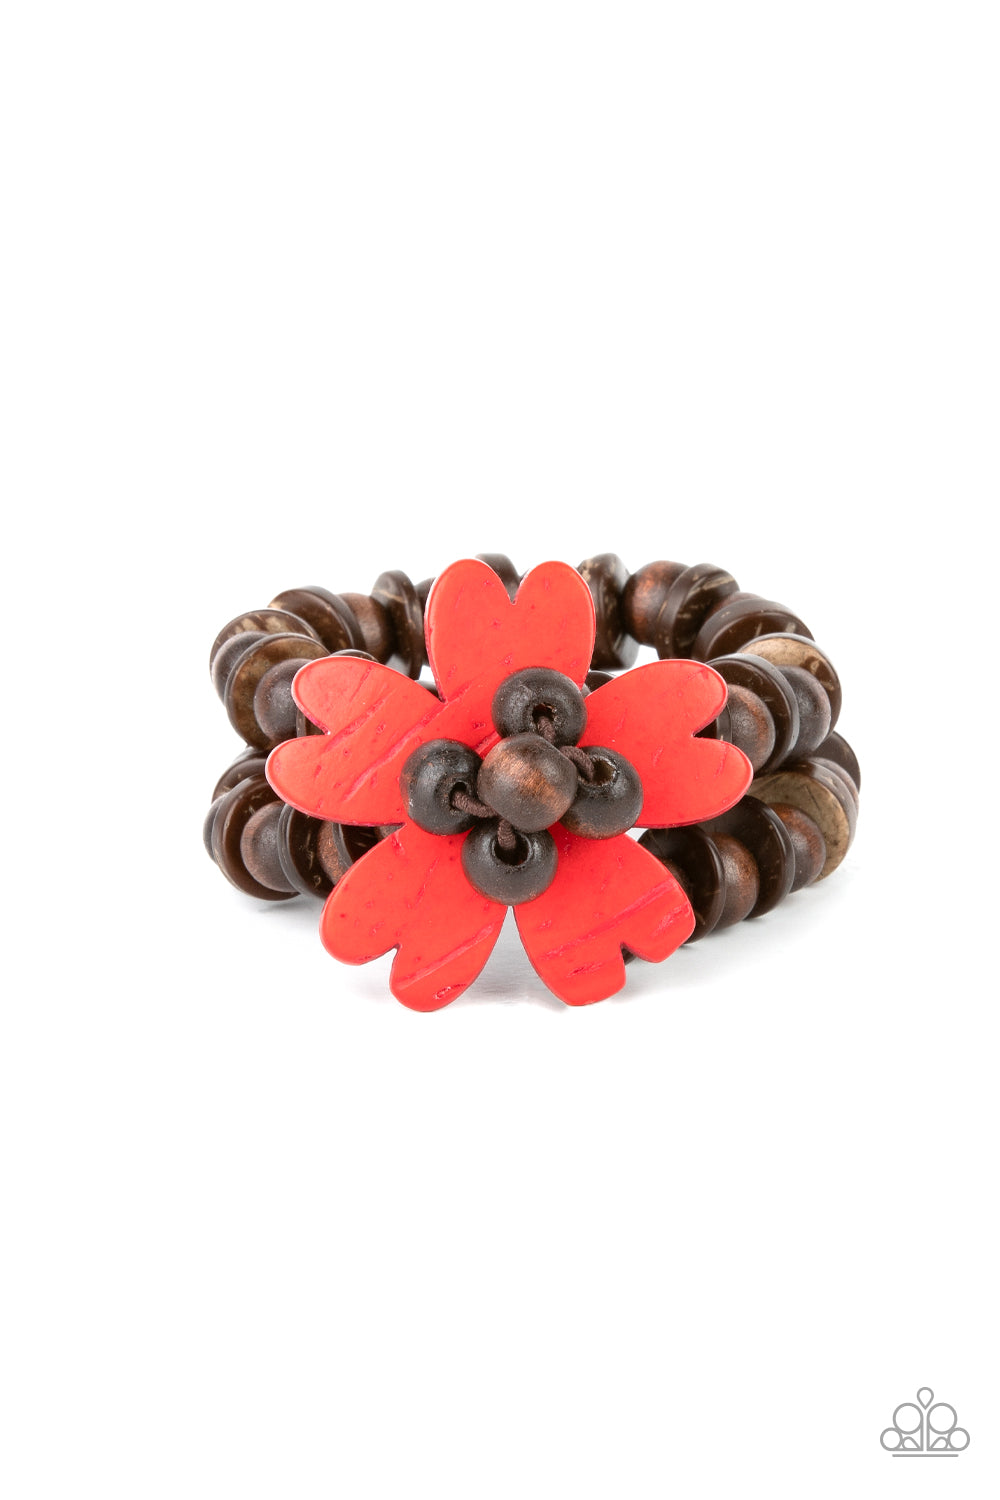 Tropical Flavor Red Wooden Bracelet - Paparazzi Accessories.  Featuring heart-shaped petals, a bright red wooden flower sits atop double strands of wooden beads threaded along stretchy bands for a tropical flair atop the wrist.  ﻿﻿﻿All Paparazzi Accessories are lead free and nickel free!  Sold as one individual bracelet.